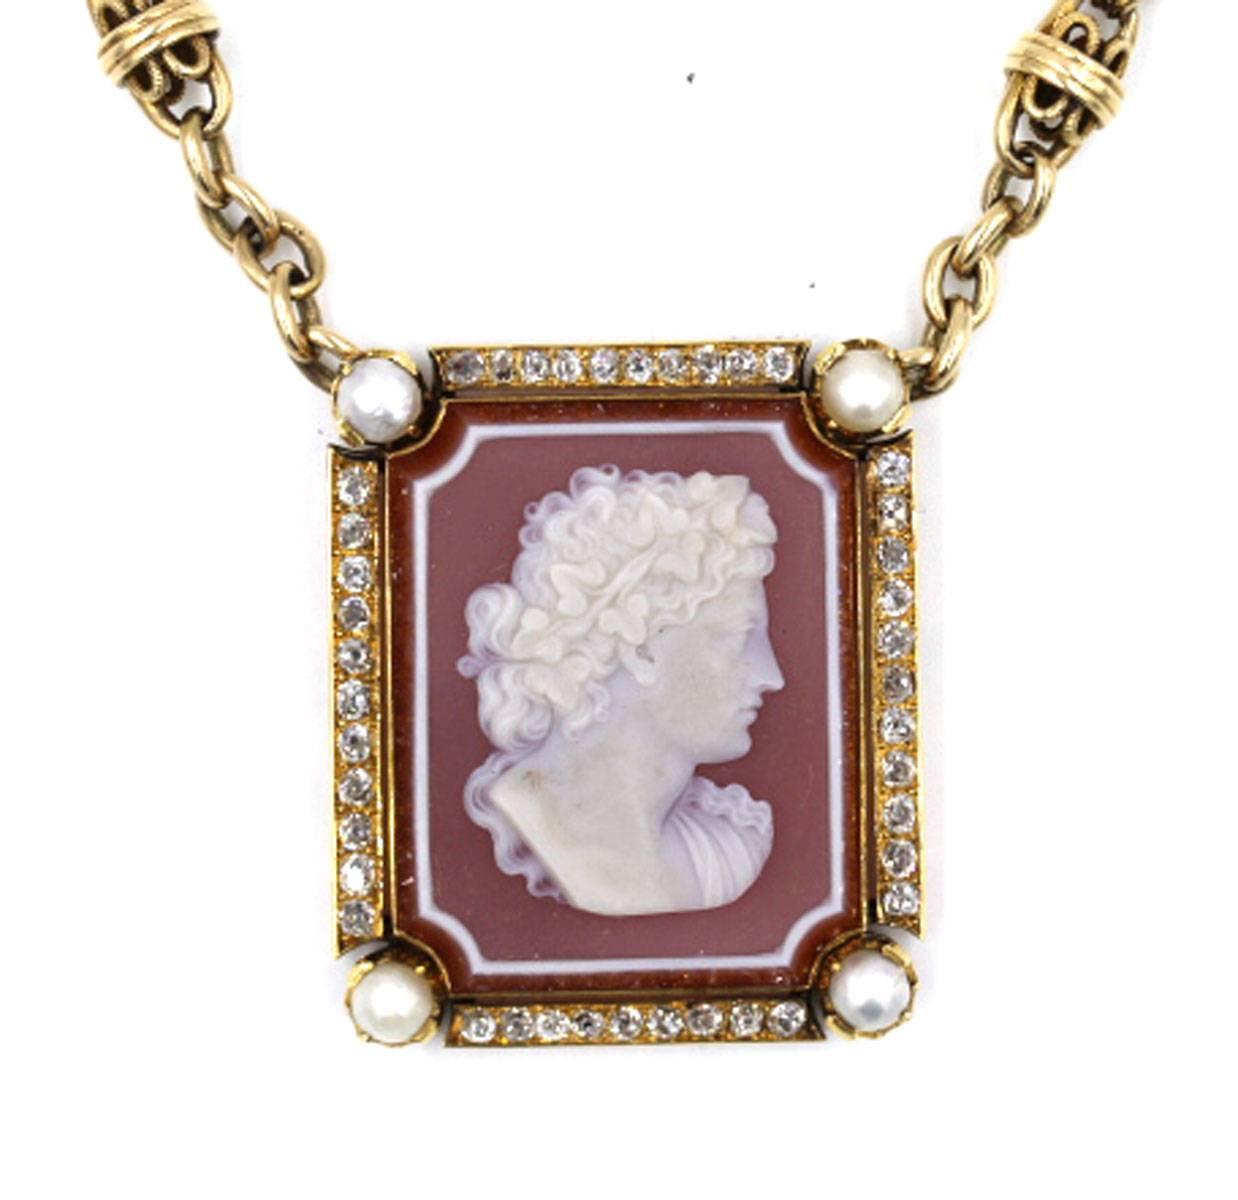 This antique cameo pendant features 40 Old European Cut Diamonds which equal approximately 2 carat total weight. This necklace was purchased from the customer in this fashion, as a marriage of a cameo pendant and old watch chain. The pendant is from